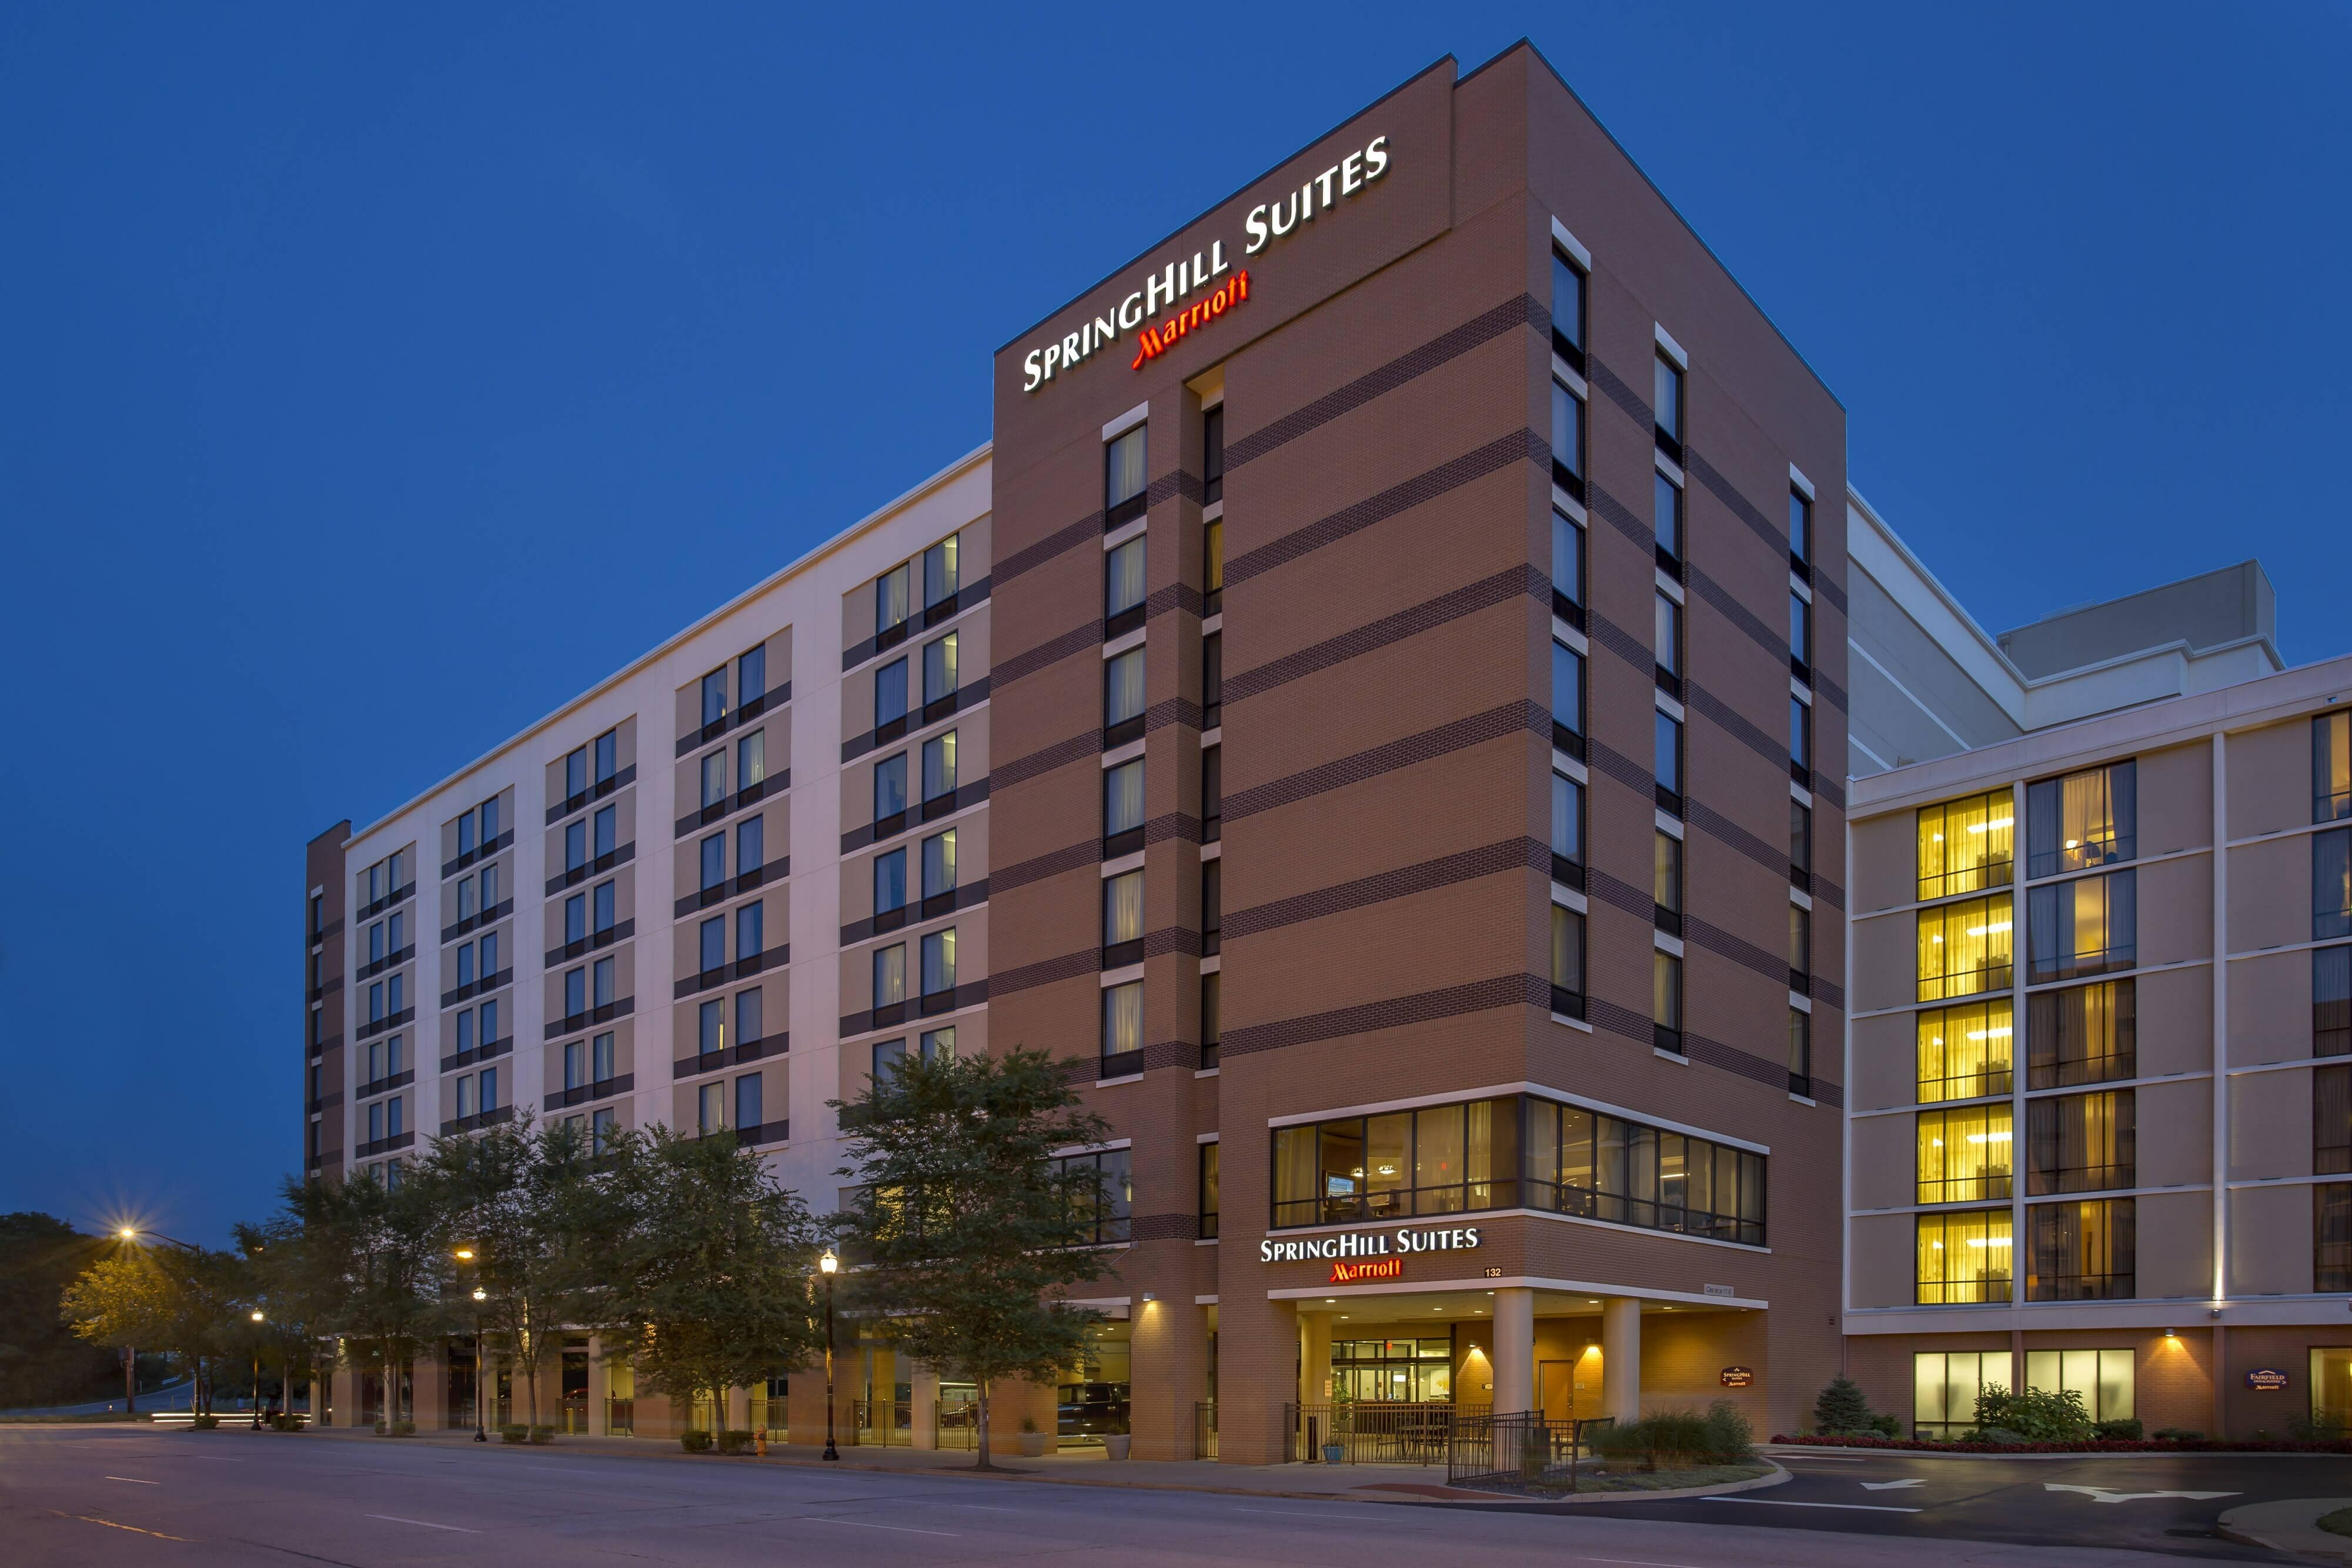 Photo of SpringHill Suites by Marriott Louisville Downtown, Louisville, KY